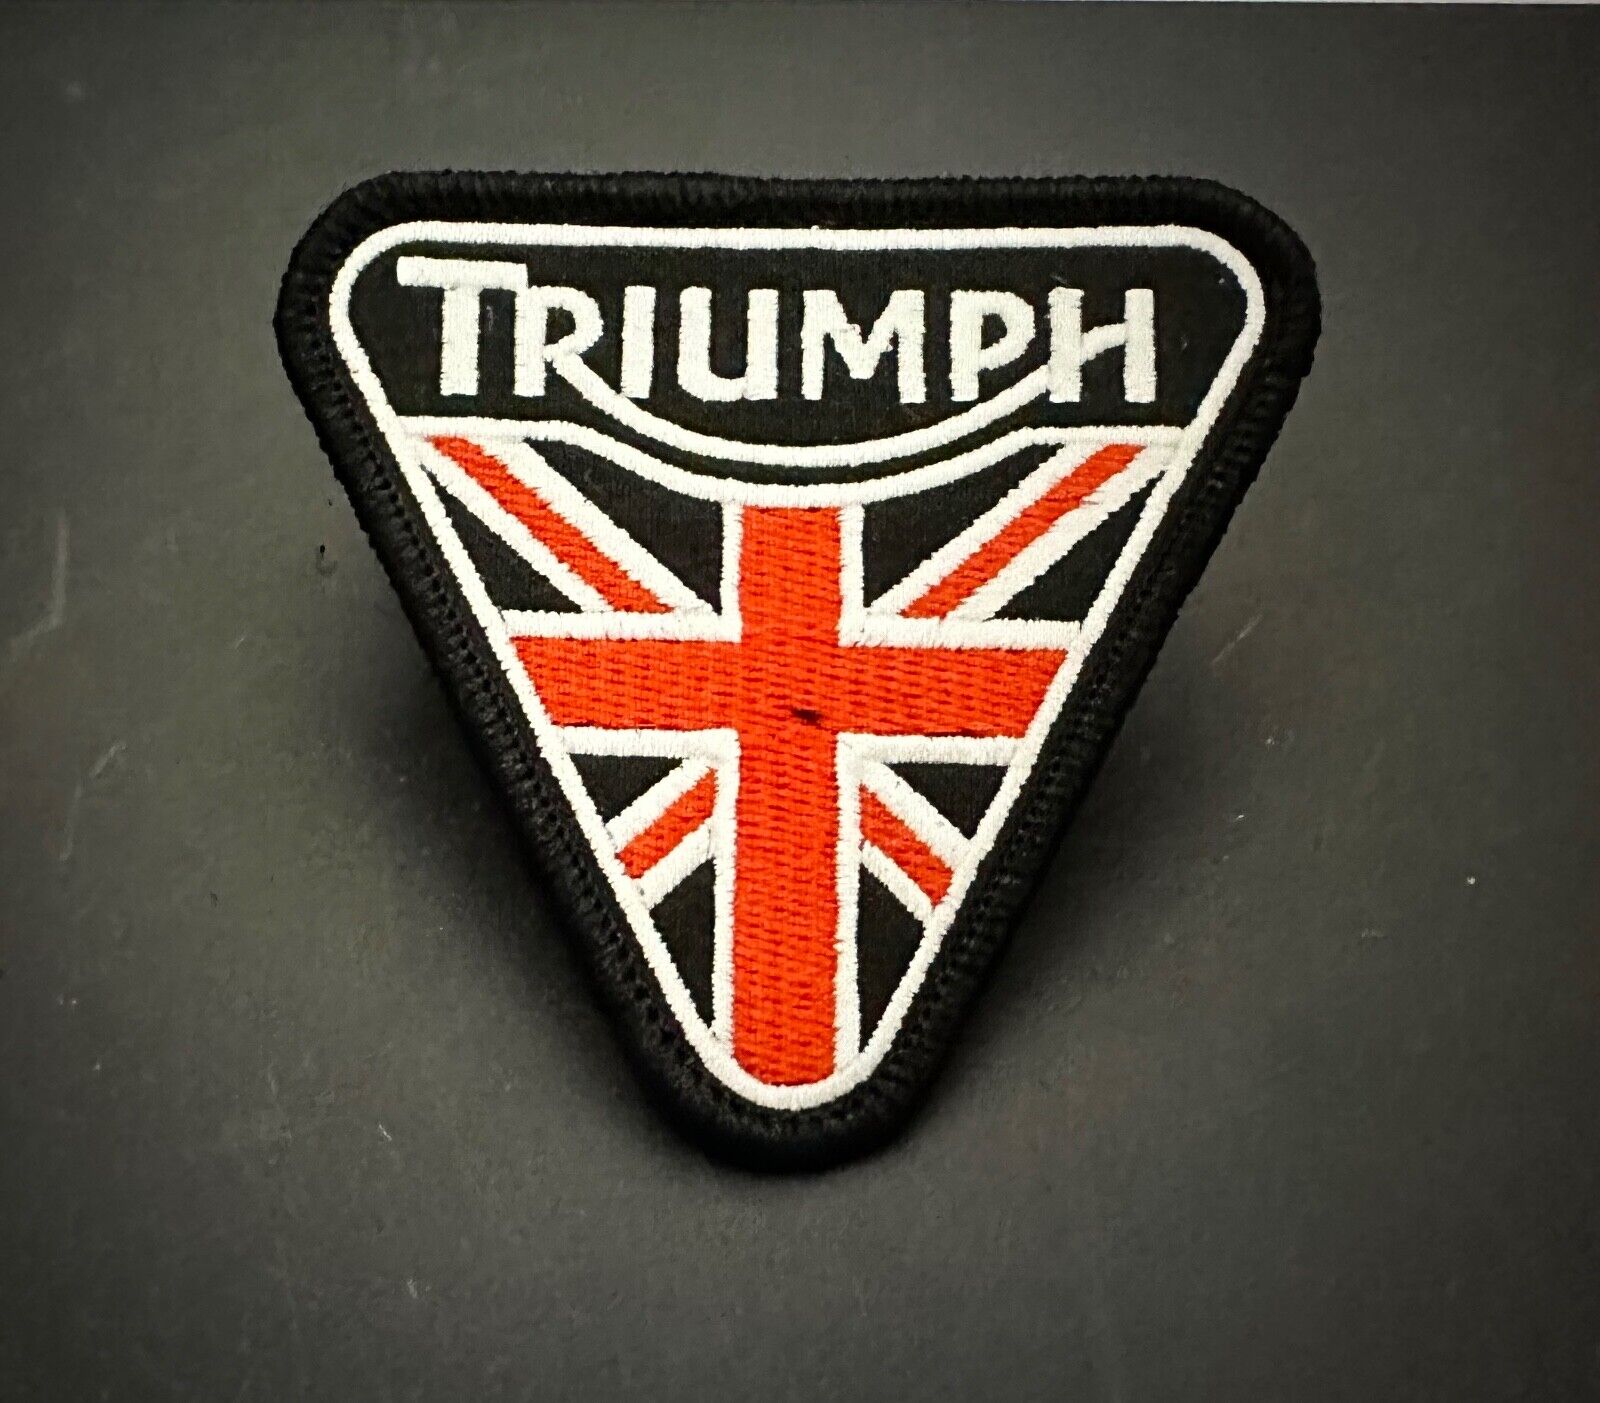 FABULOUS TRIUMPH MOTORCYCLES EMBROIDERED IRON-ON PATCH...VERY RARE COLOR COMBO